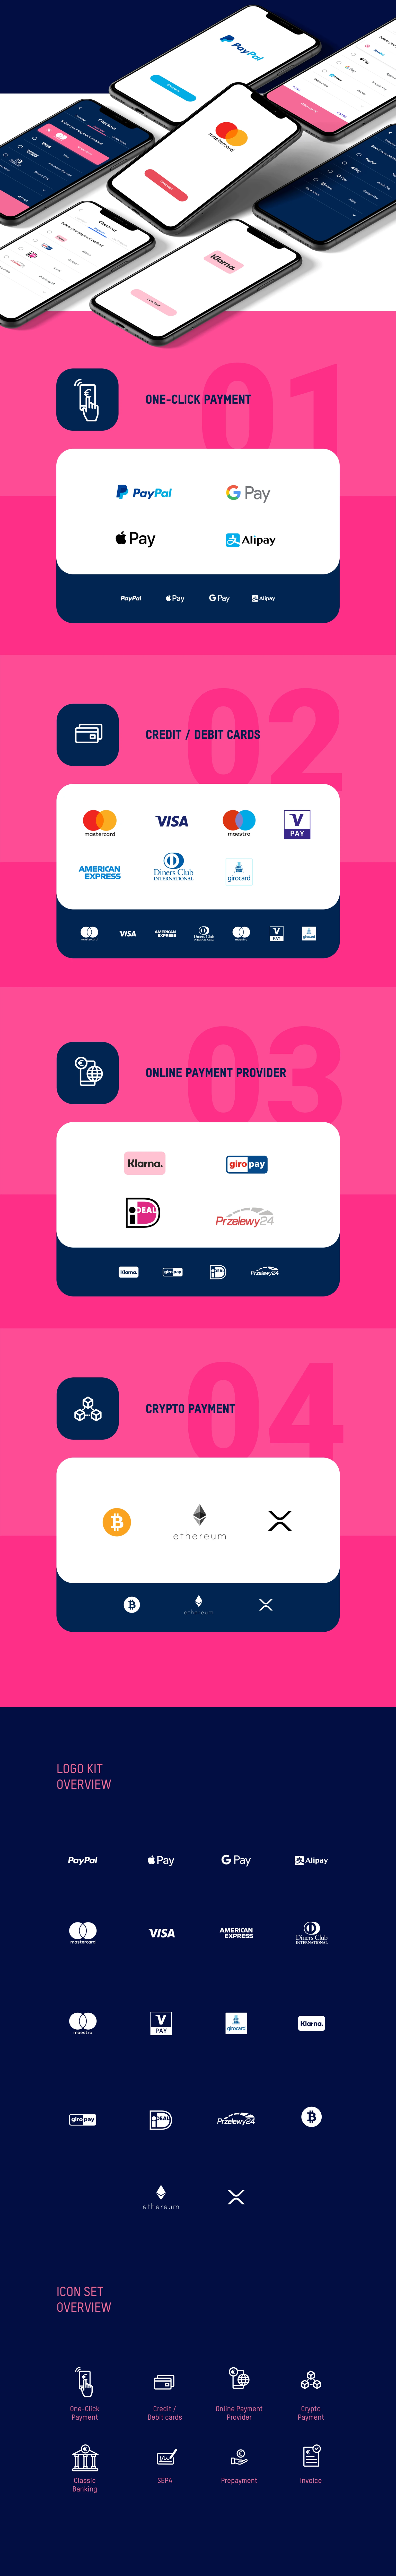 Free E-commerce Logos for Adobe XD - We are used to digital payment. Design faster using our carefully selected free E-Commerce Logo Kit. We thoughtfully composed this collection of most popular national and international payment methods. All logos have been perfectly sized for mobile applications.